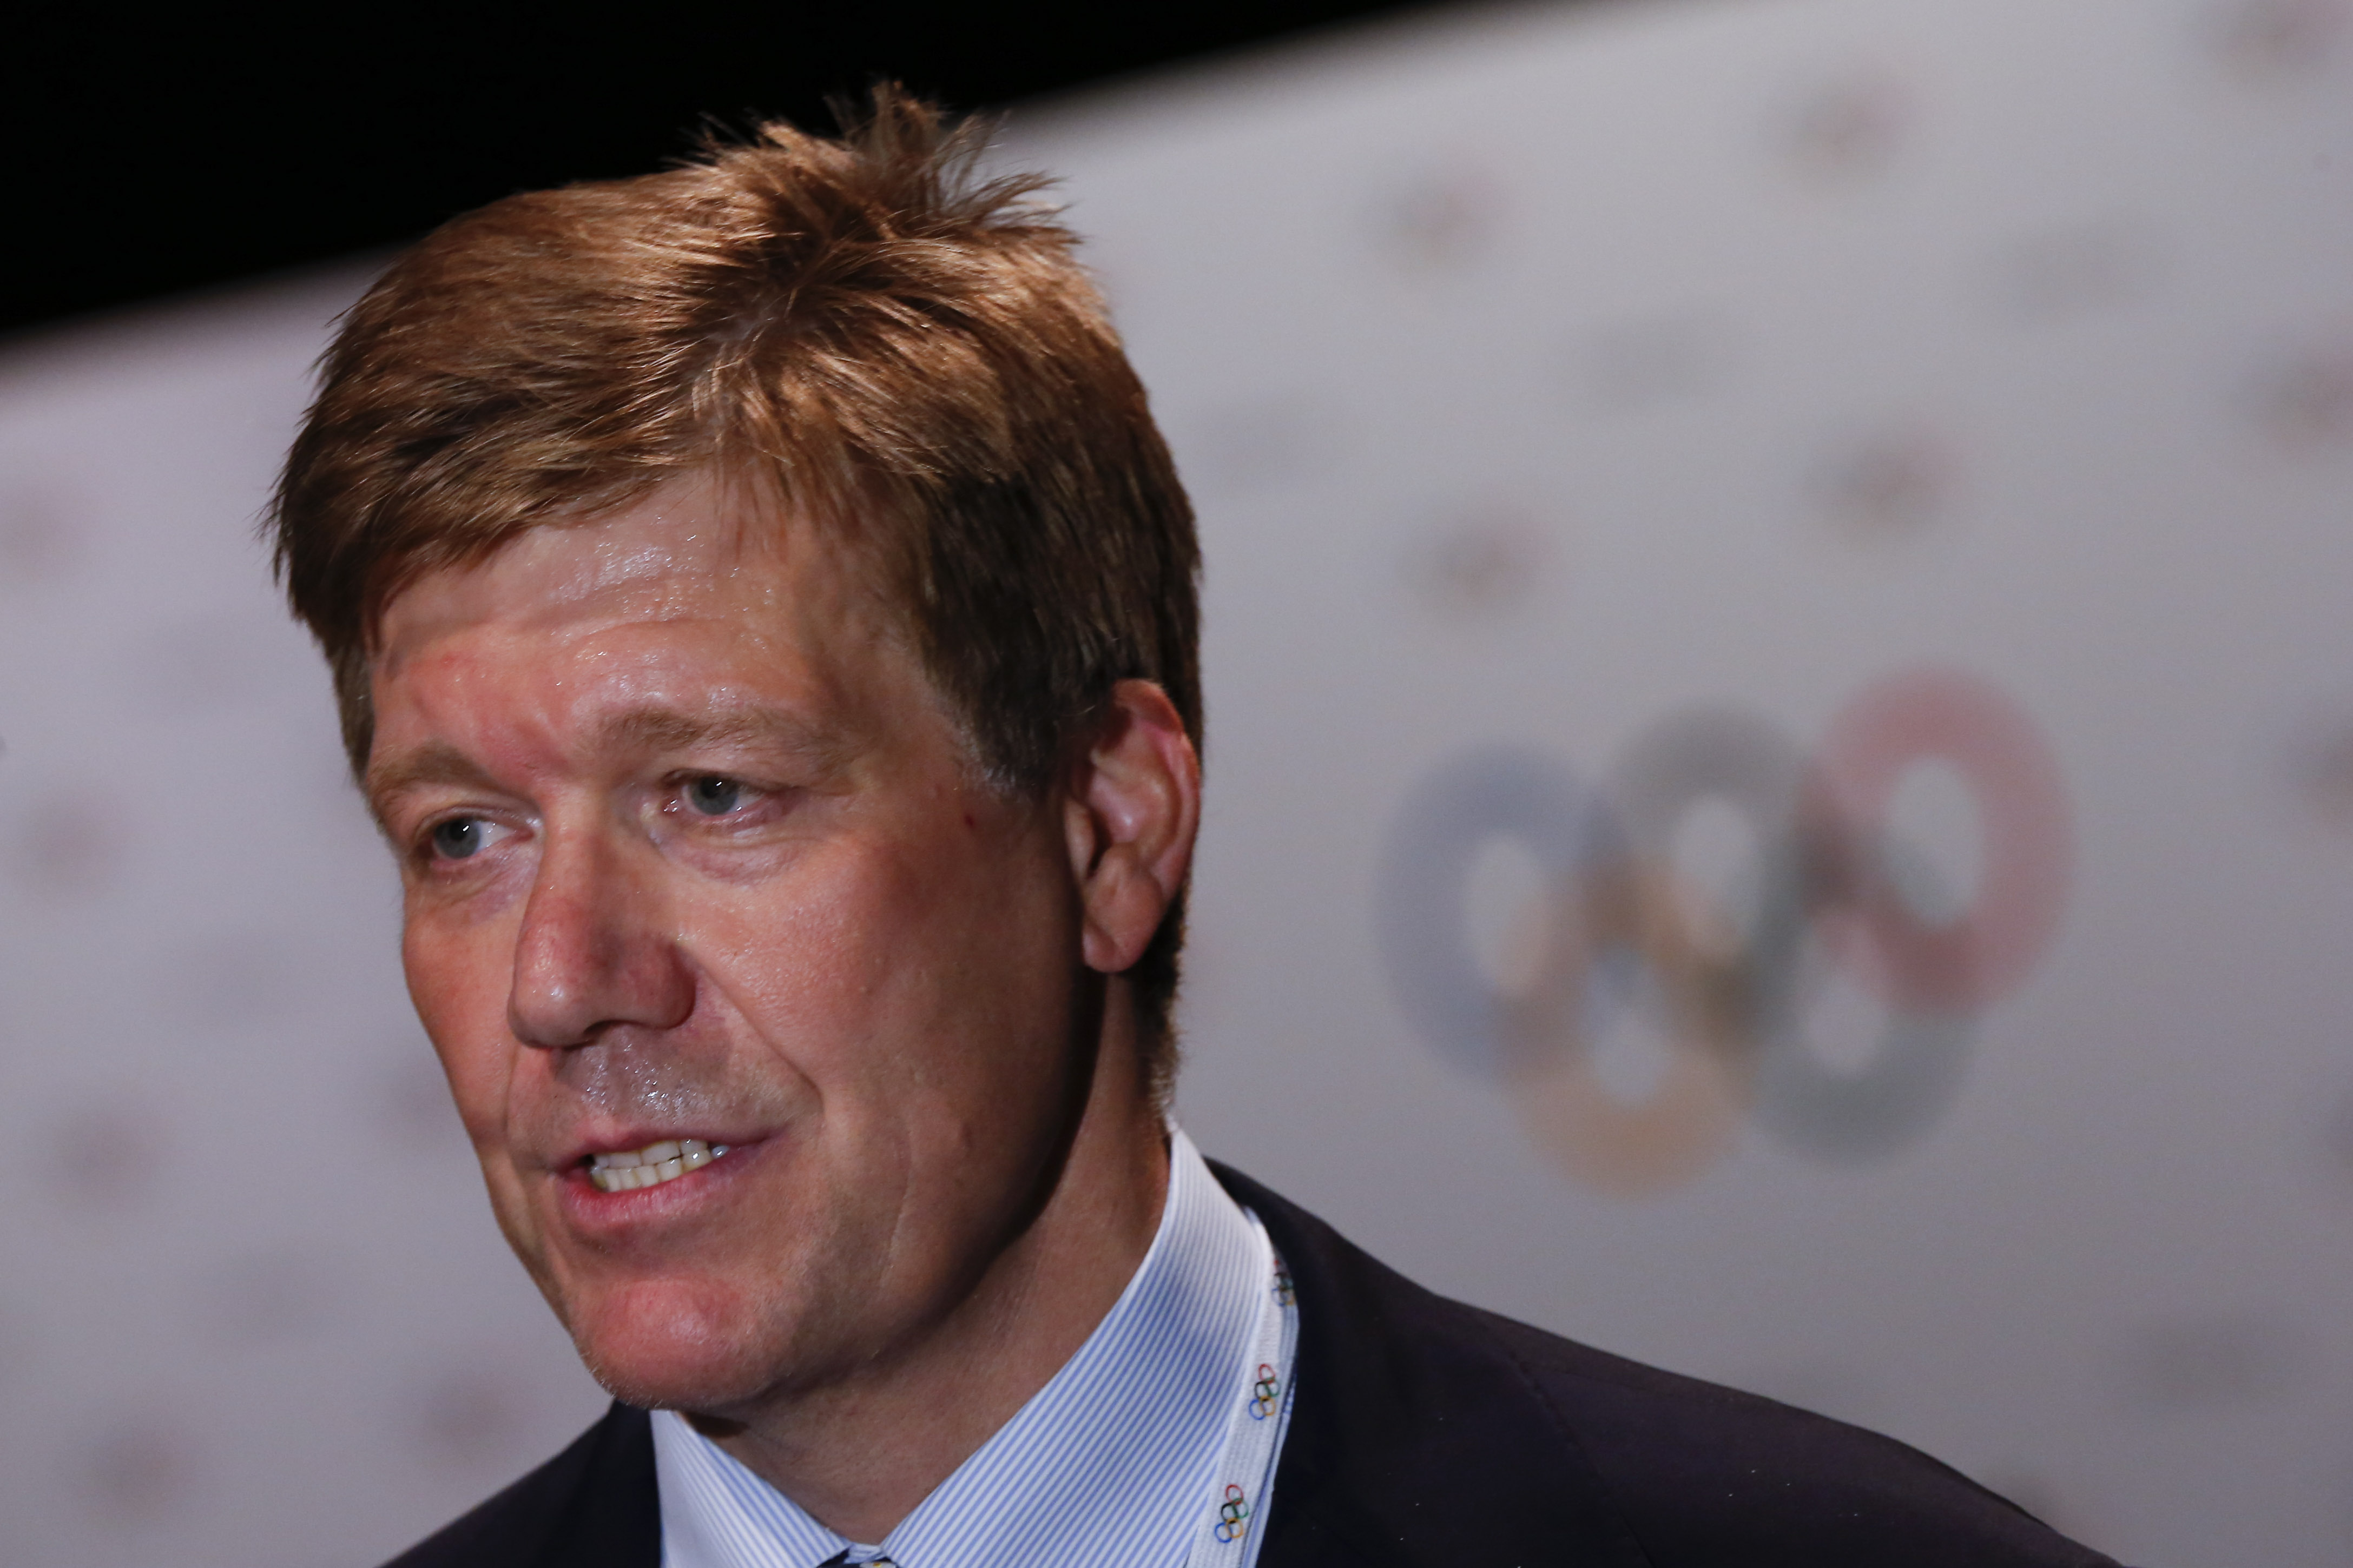 You can run but you can't hide, IOC tells doping cheats